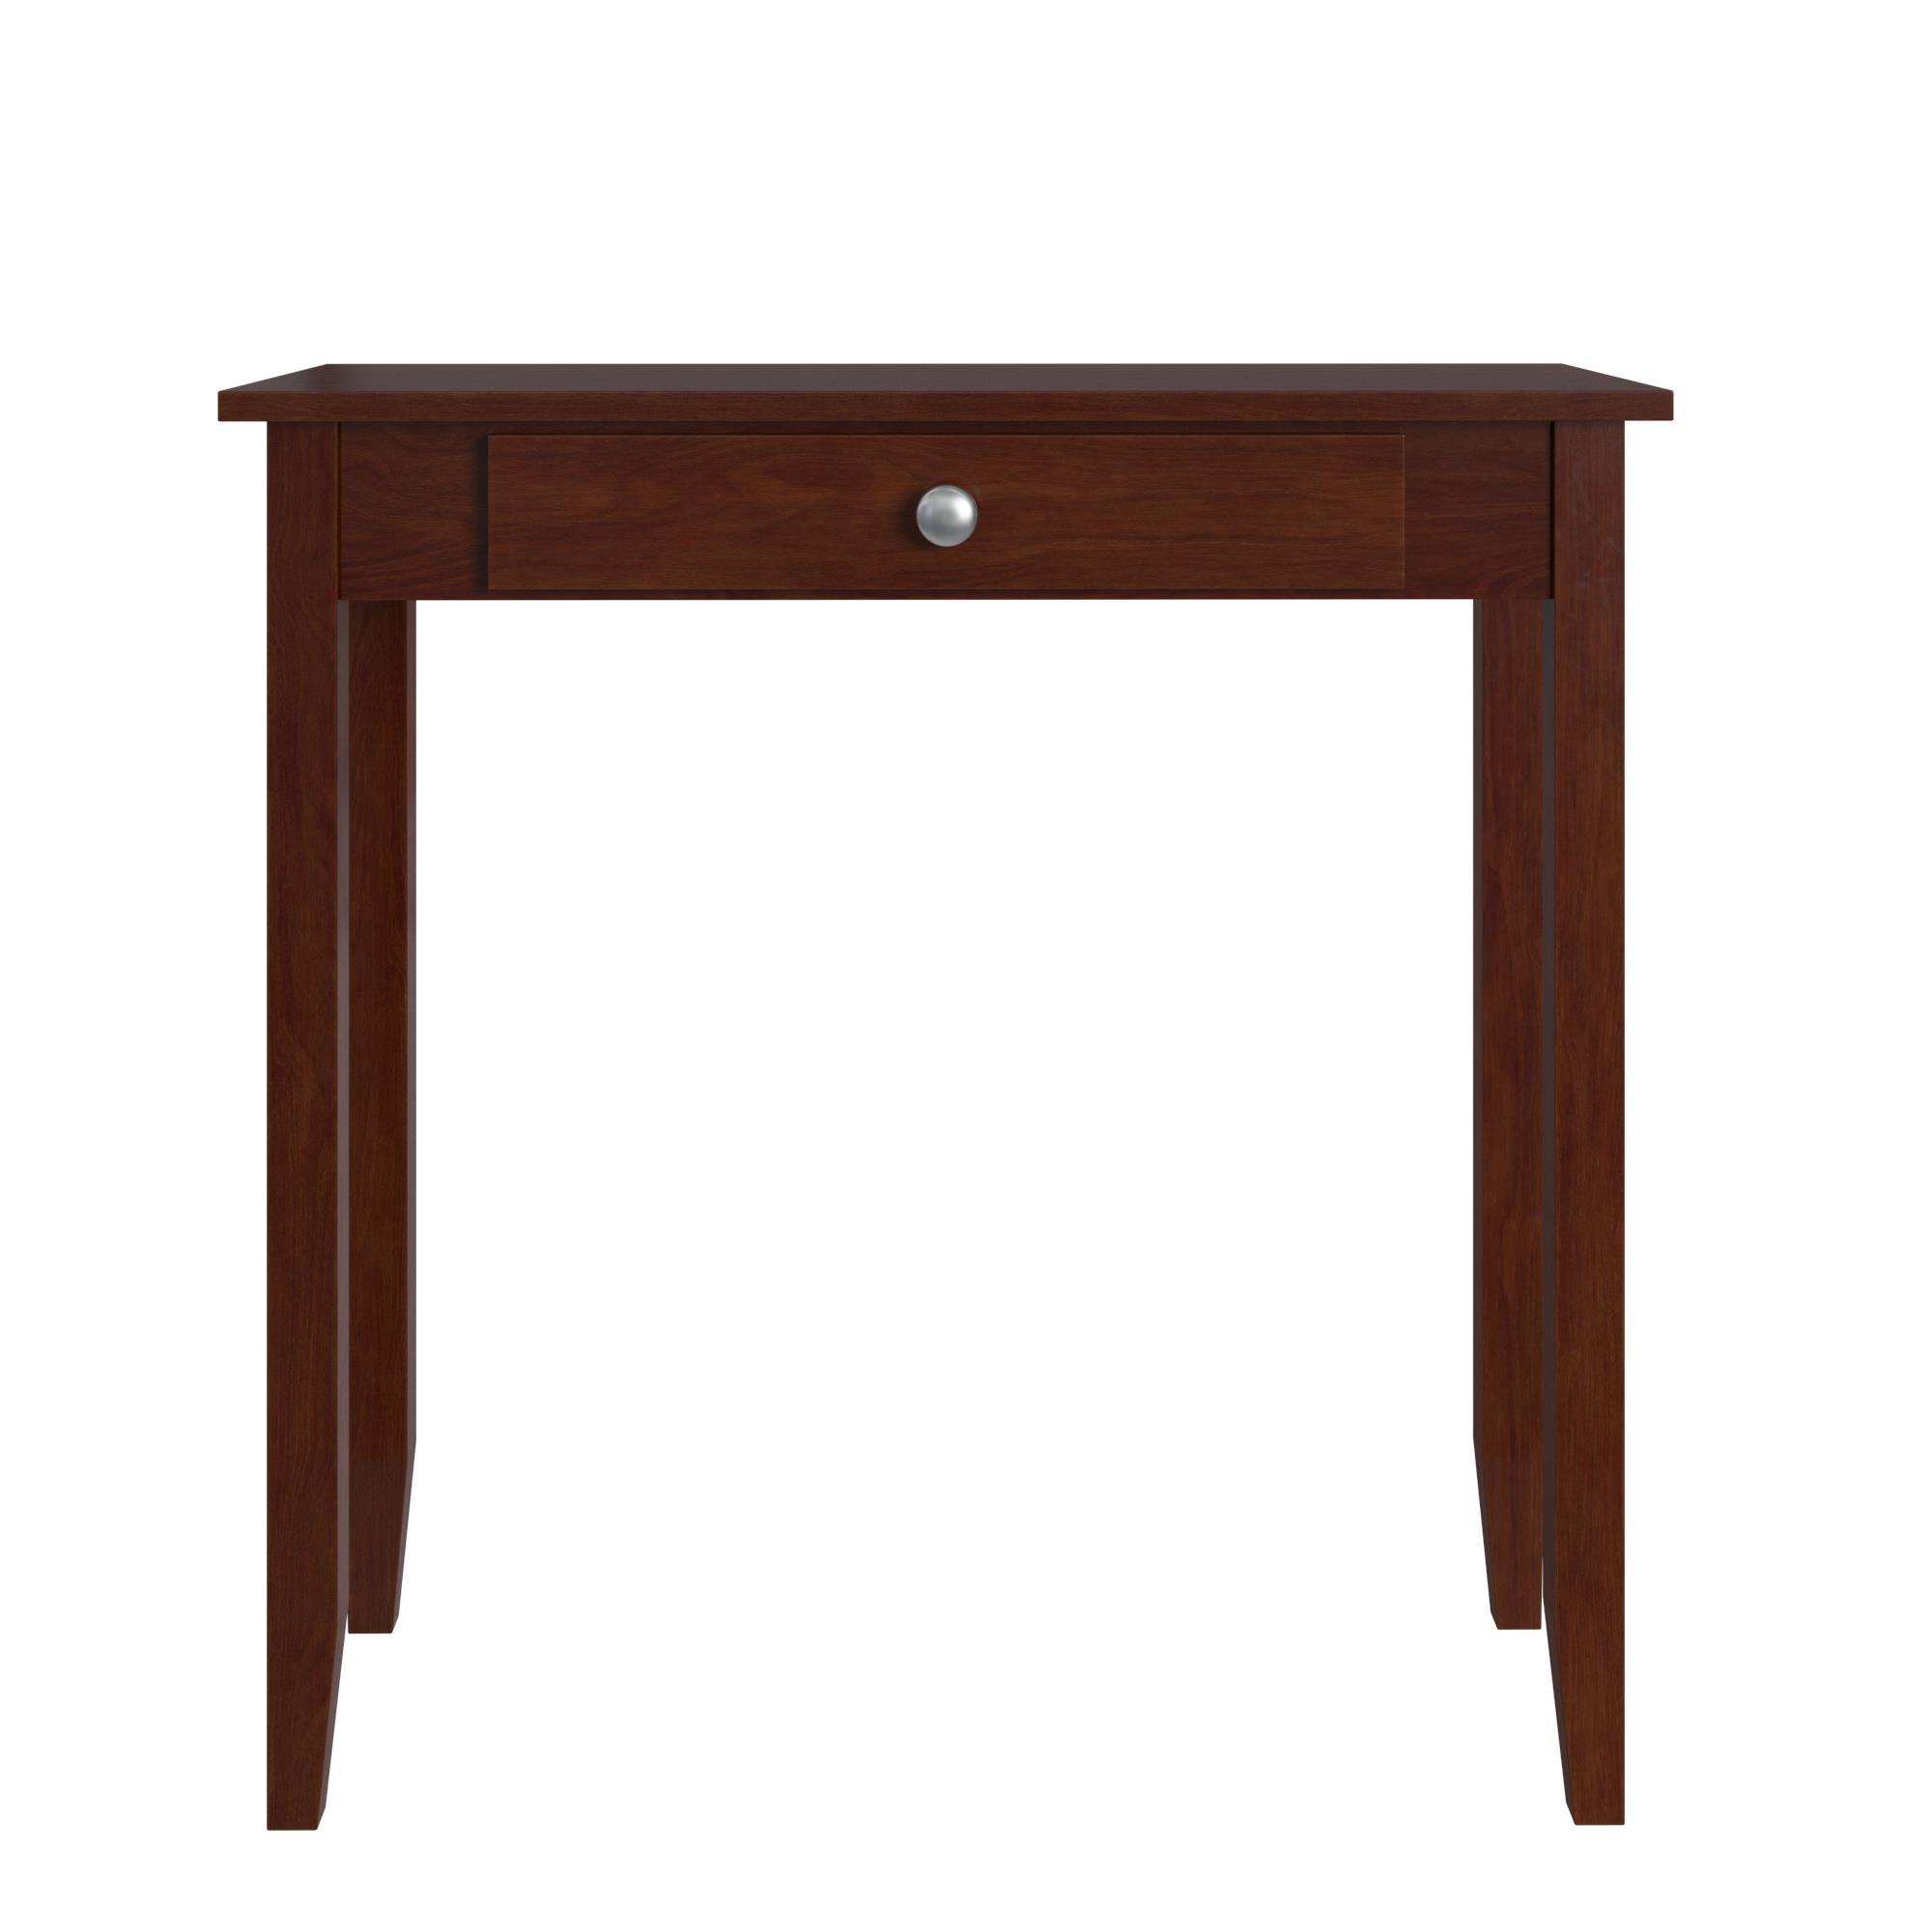 DHP Rosewood Console Table, Medium Coffee - image 1 of 8